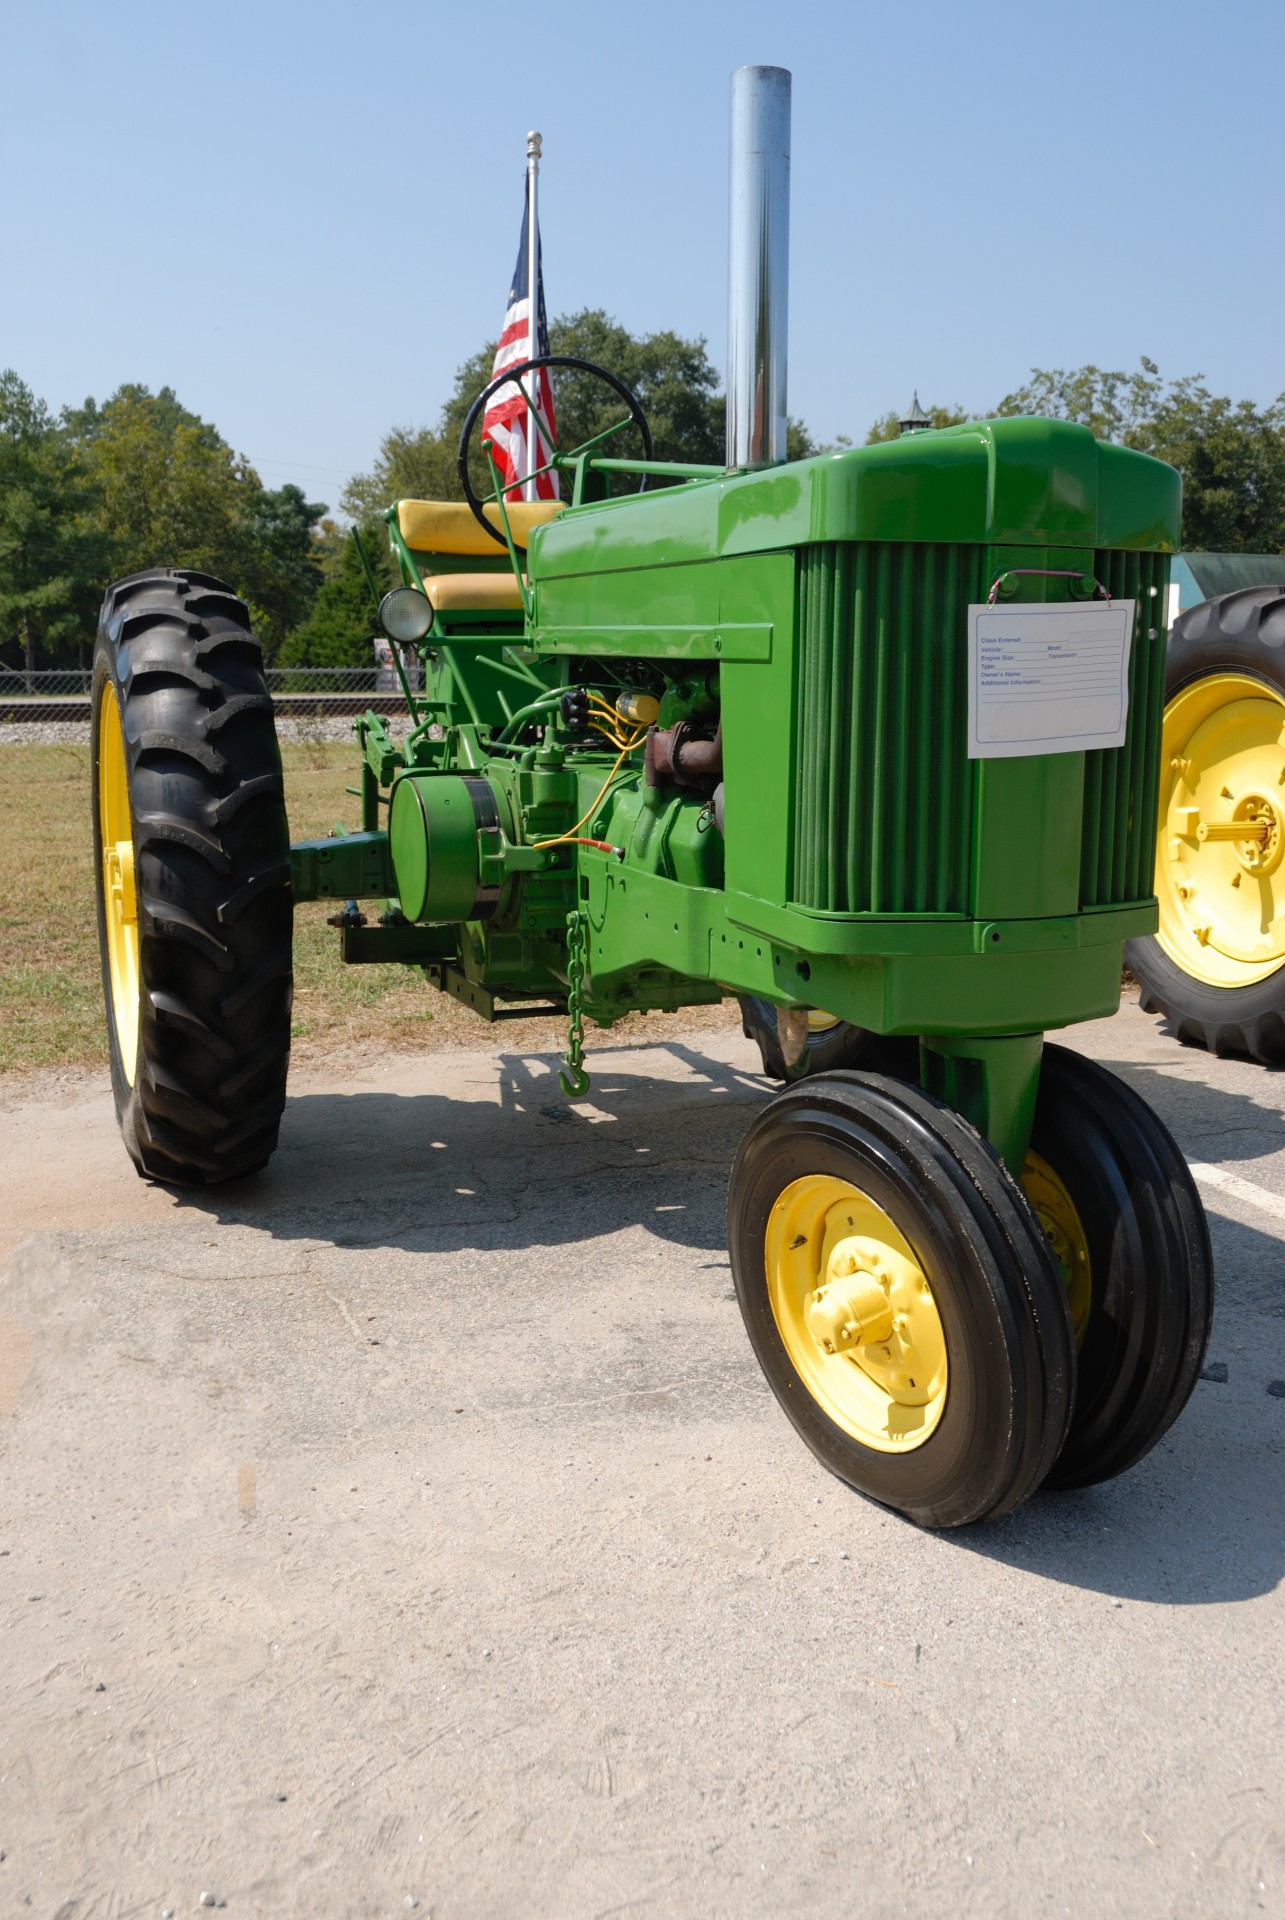 vintage green tractor free photo